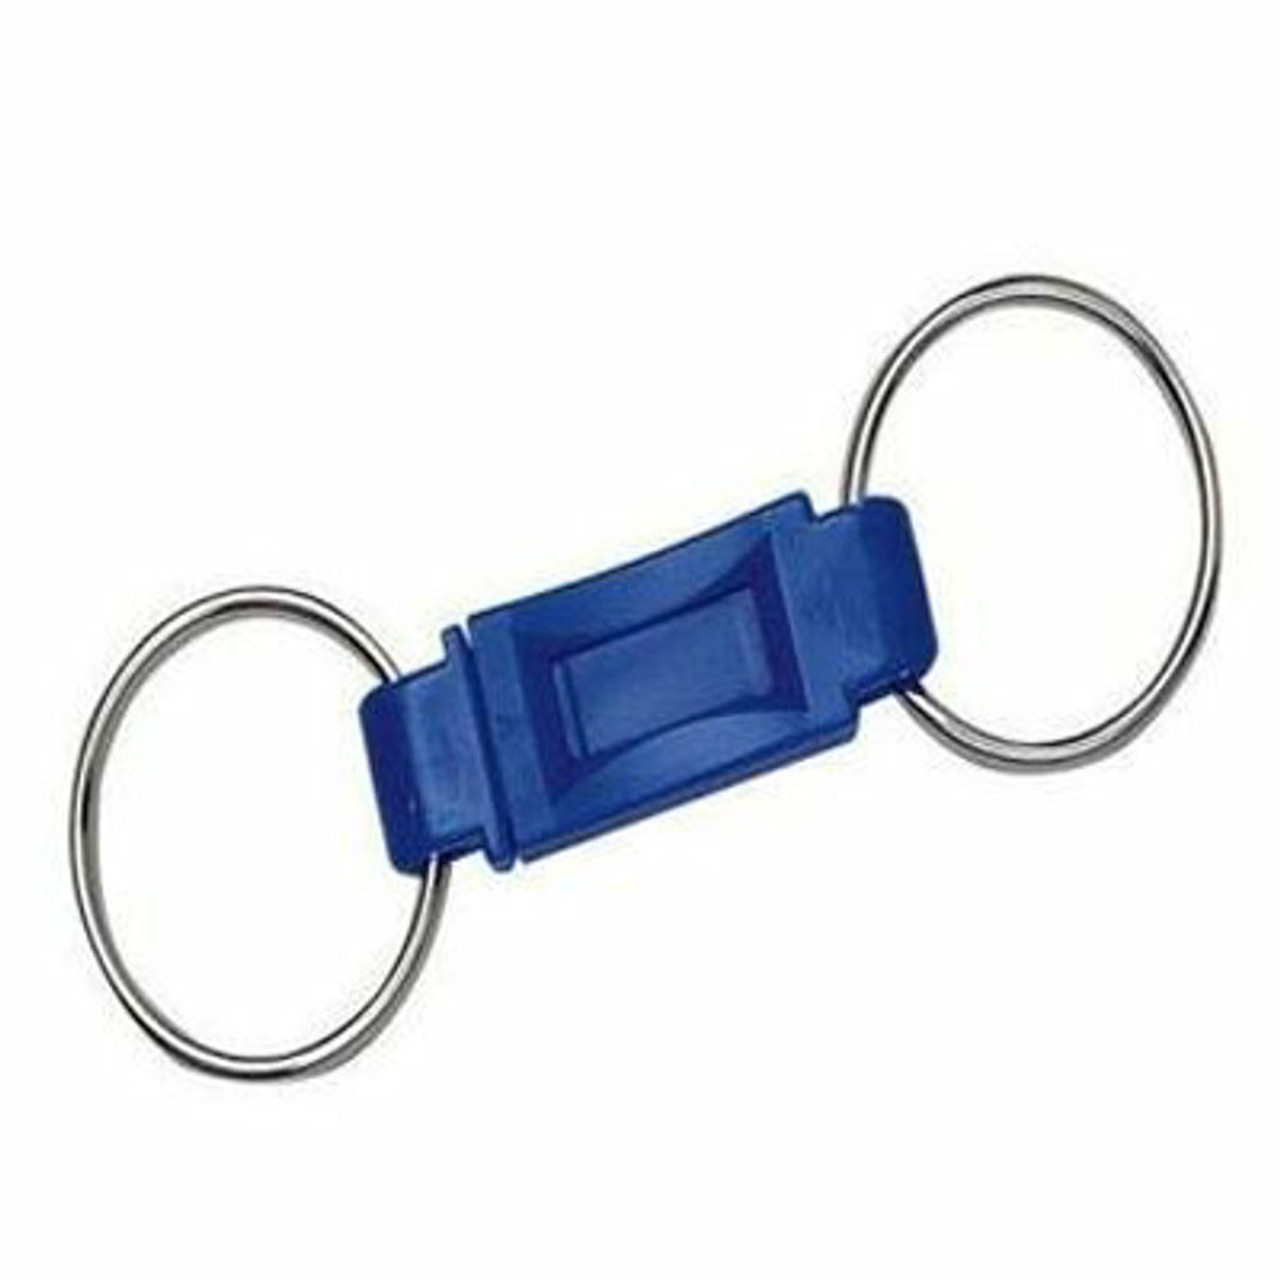 Oval Steel Key Ring Easy Open Easy Close With A Quick Finger Twist, Each